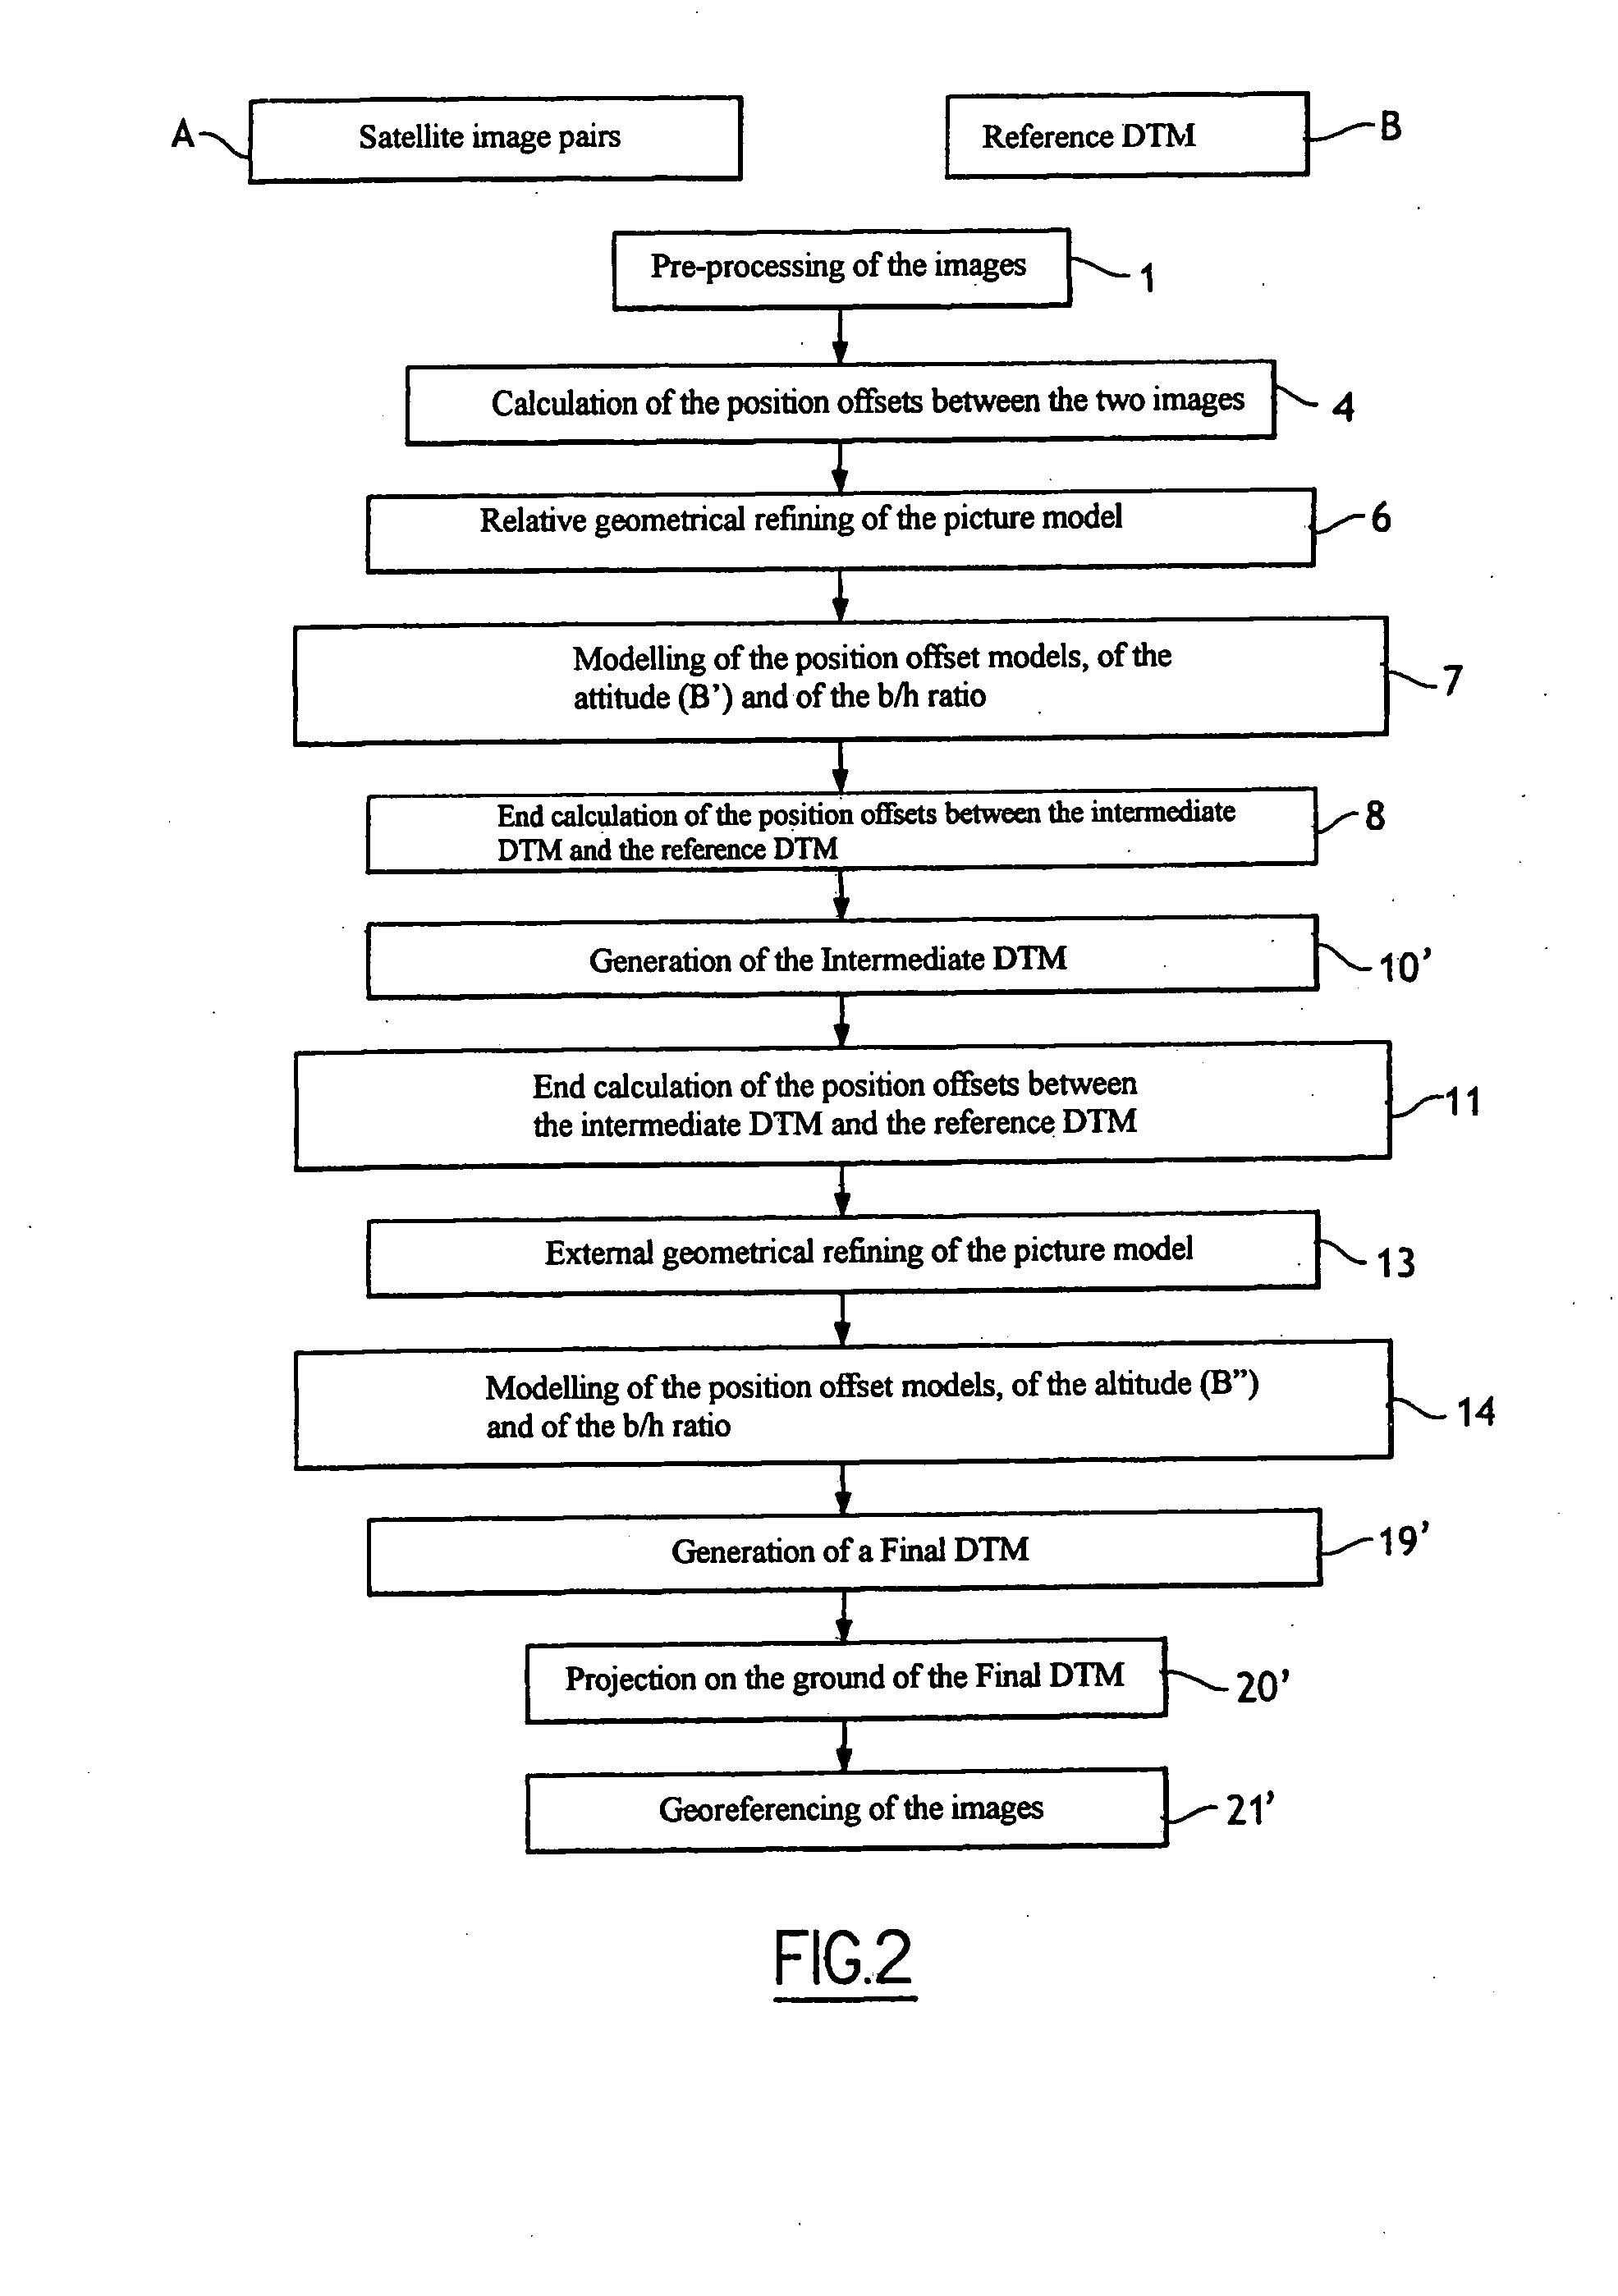 Method for Processing Images Using Automatic Georeferencing of Images Derived from a Pair of Images Captured in the Same Focal Plane